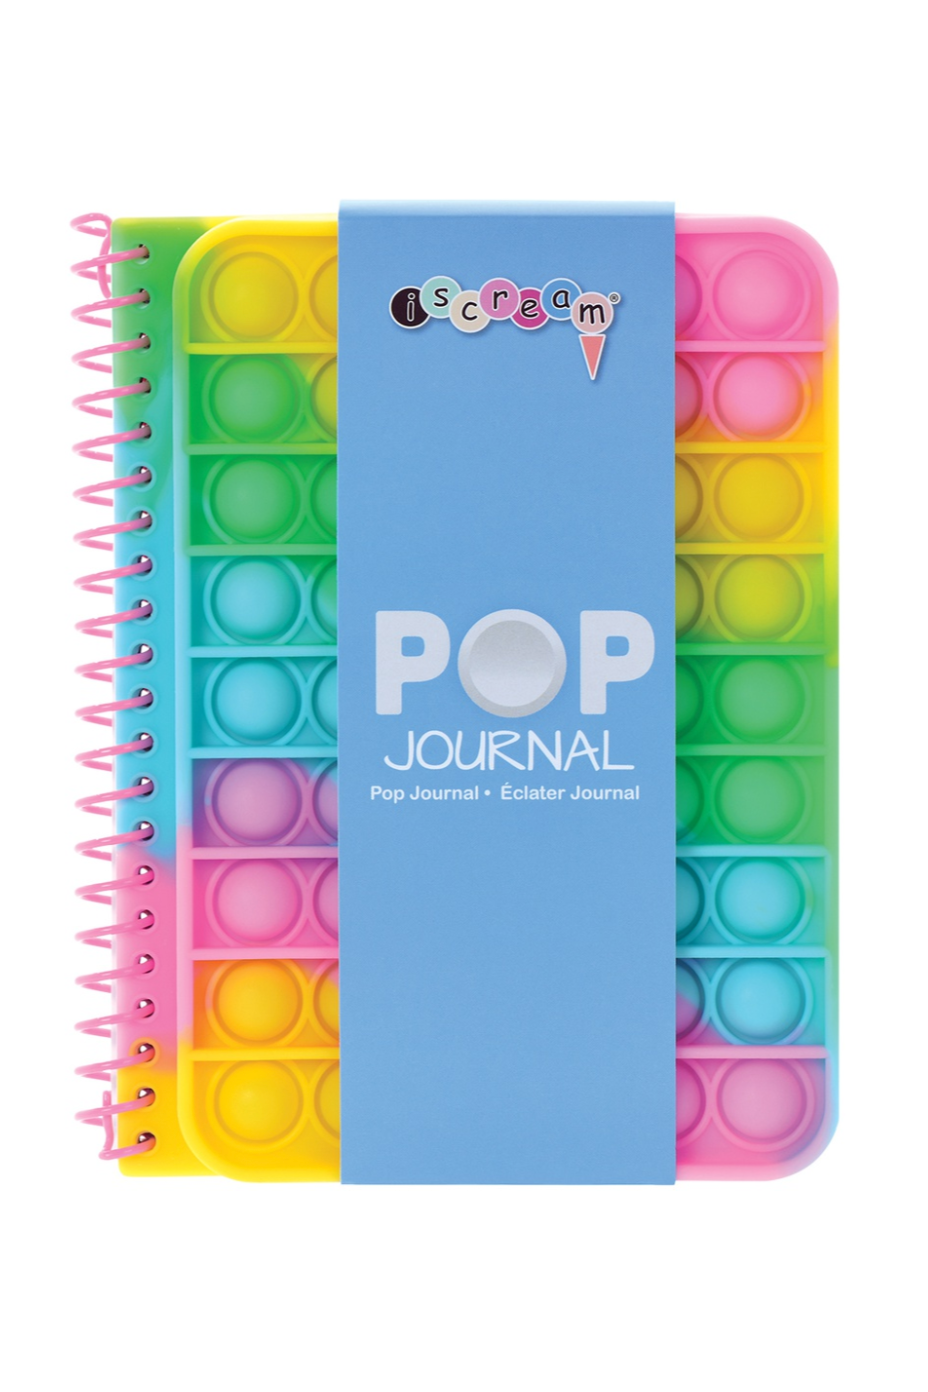 The Girls Popper Journals by IScream